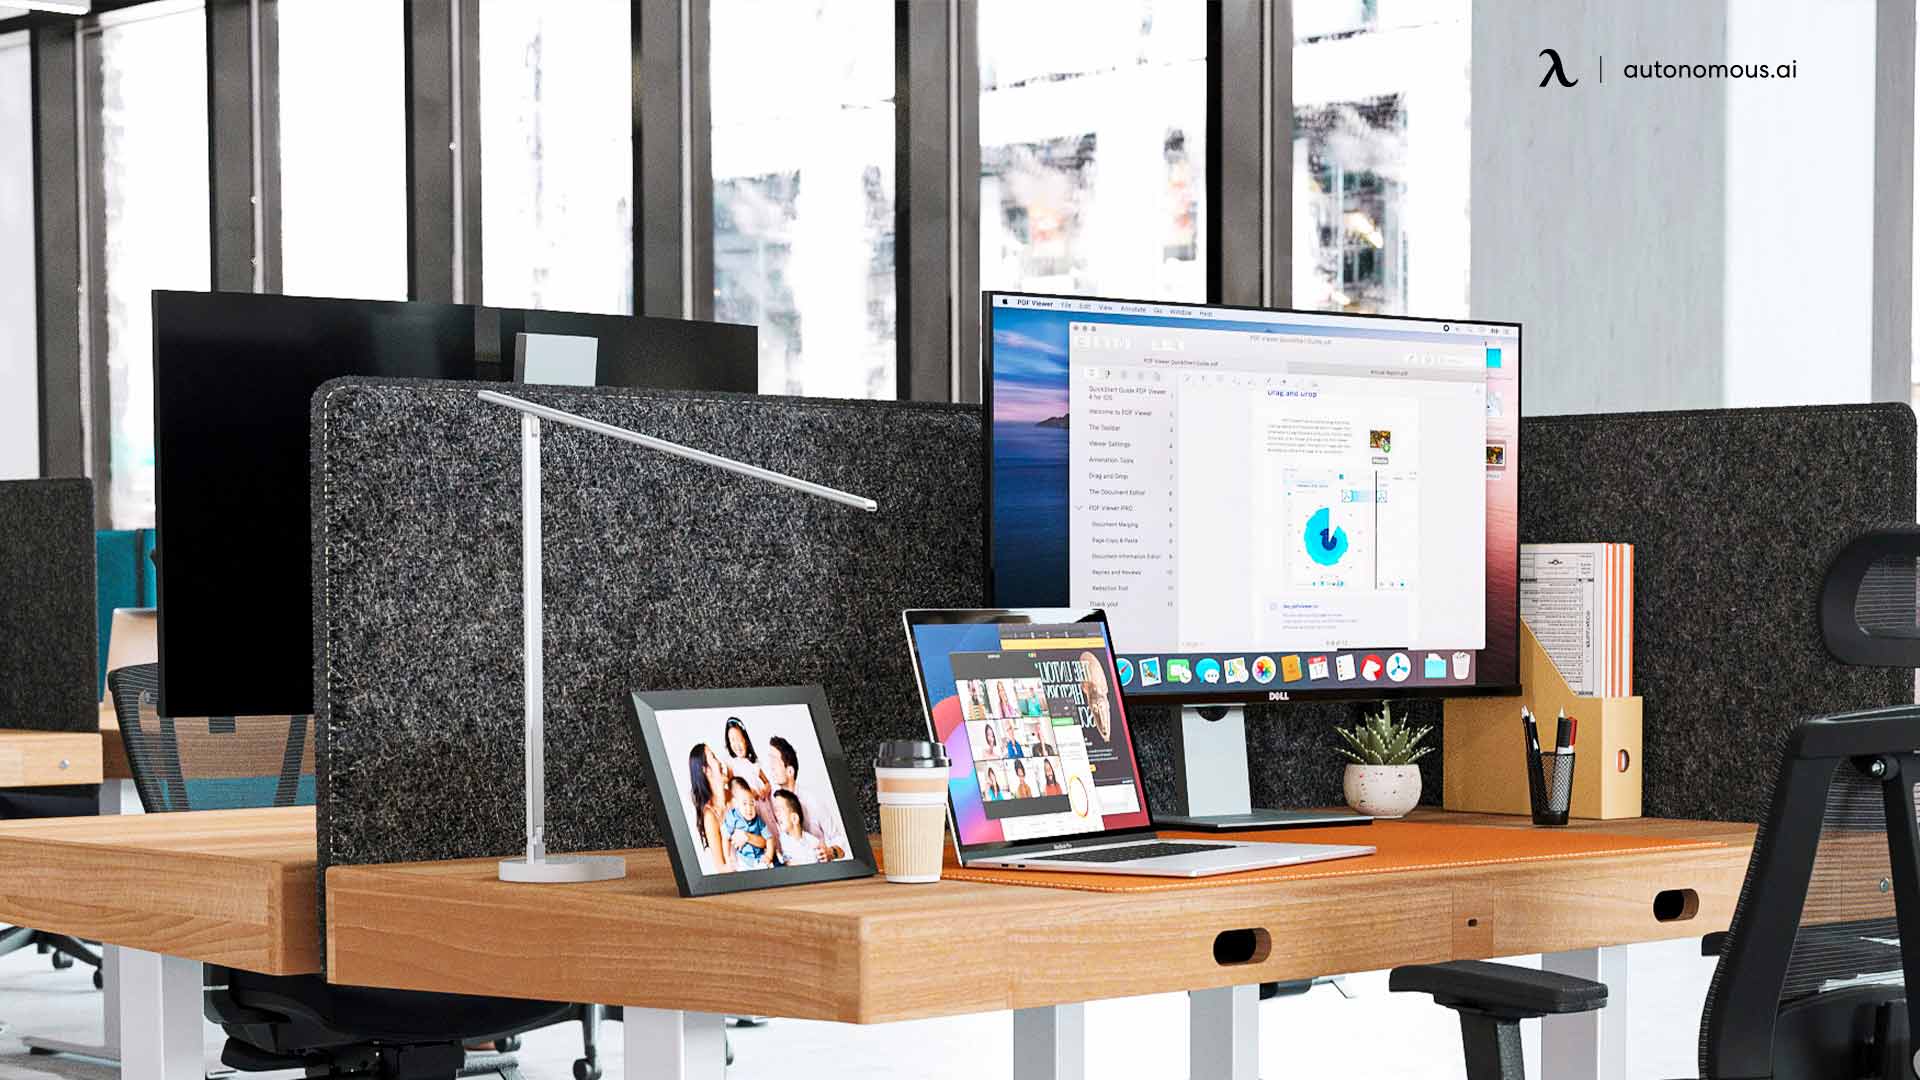 12 Office Desk Dividers for Privacy Ideas